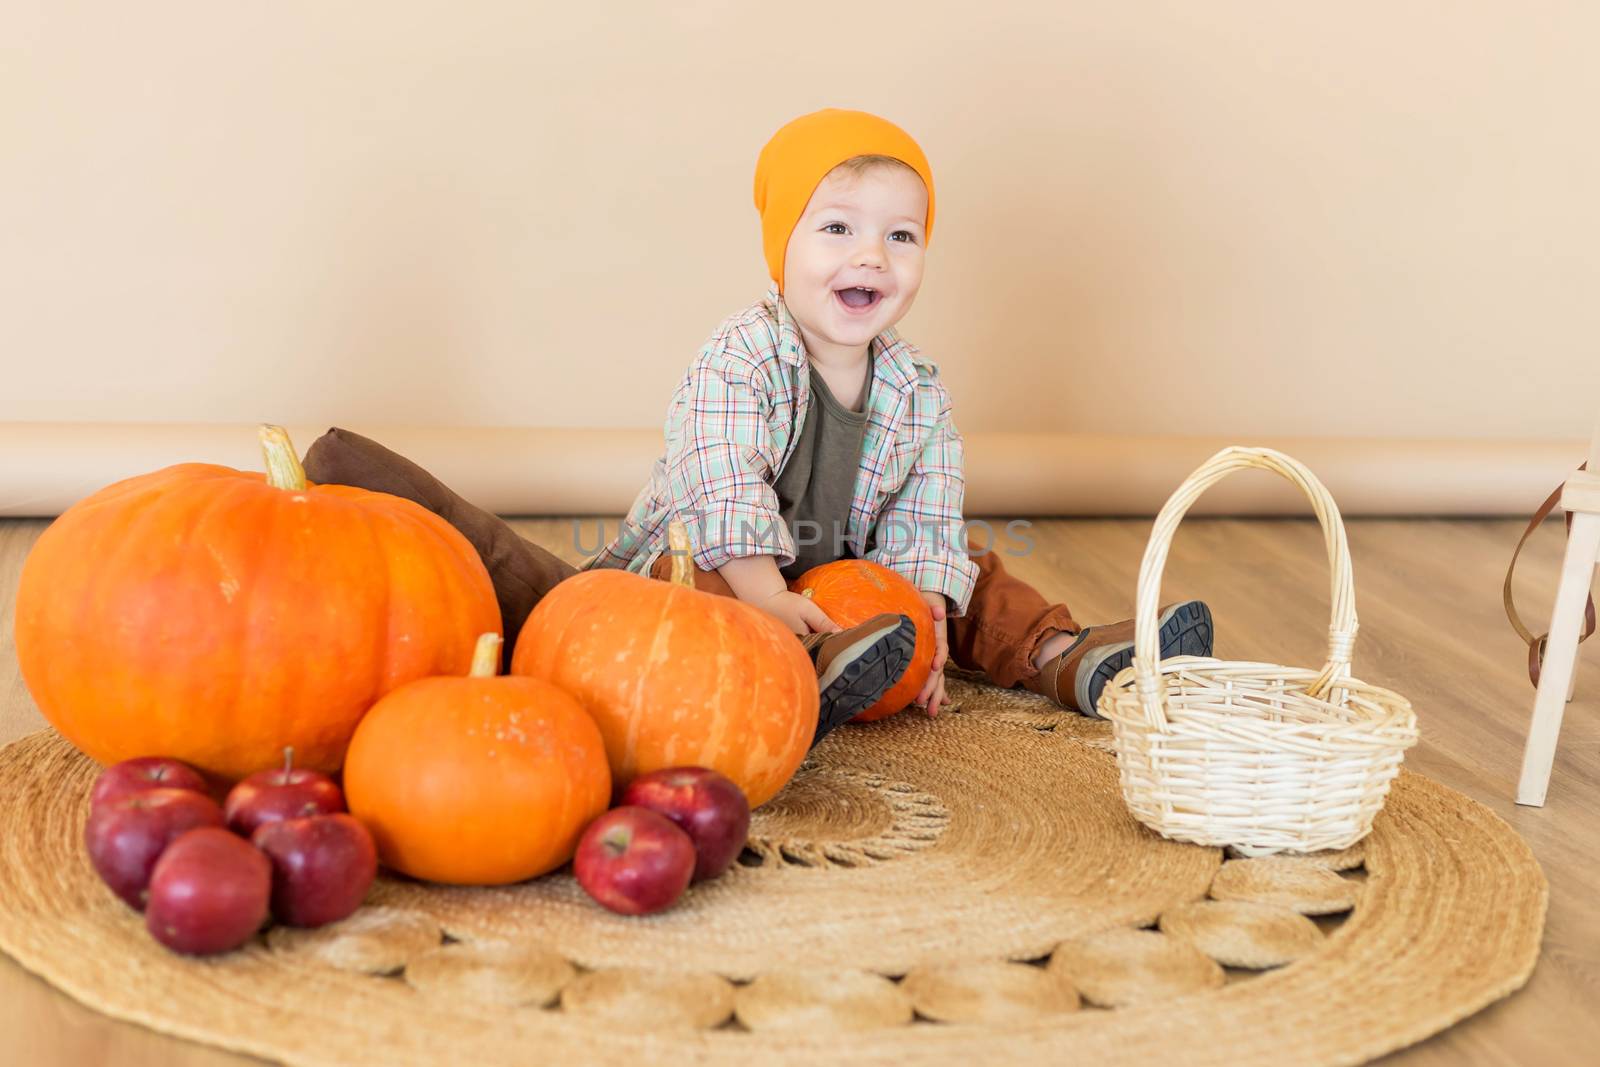 A little boy sits among pumpkins with a basket of ducklings.